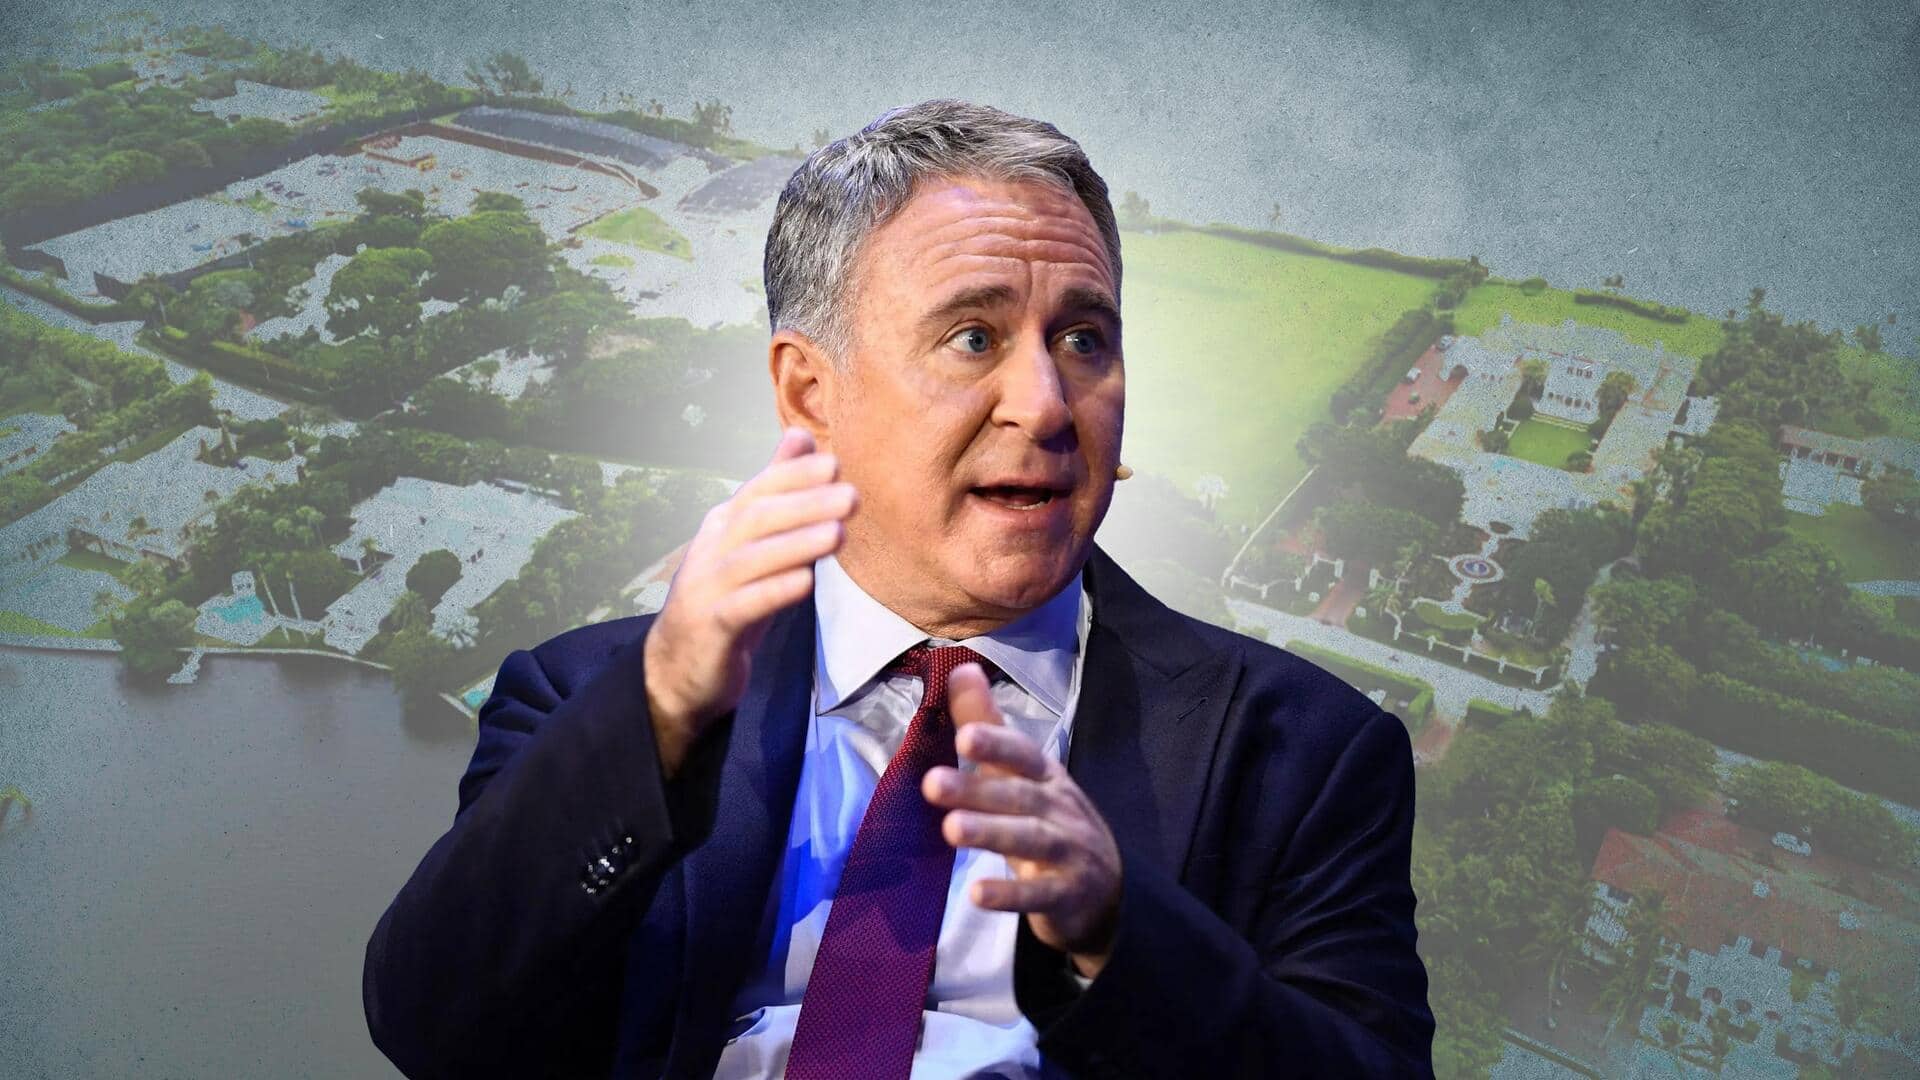 Billionaire Ken Griffin to build most expensive home on Earth